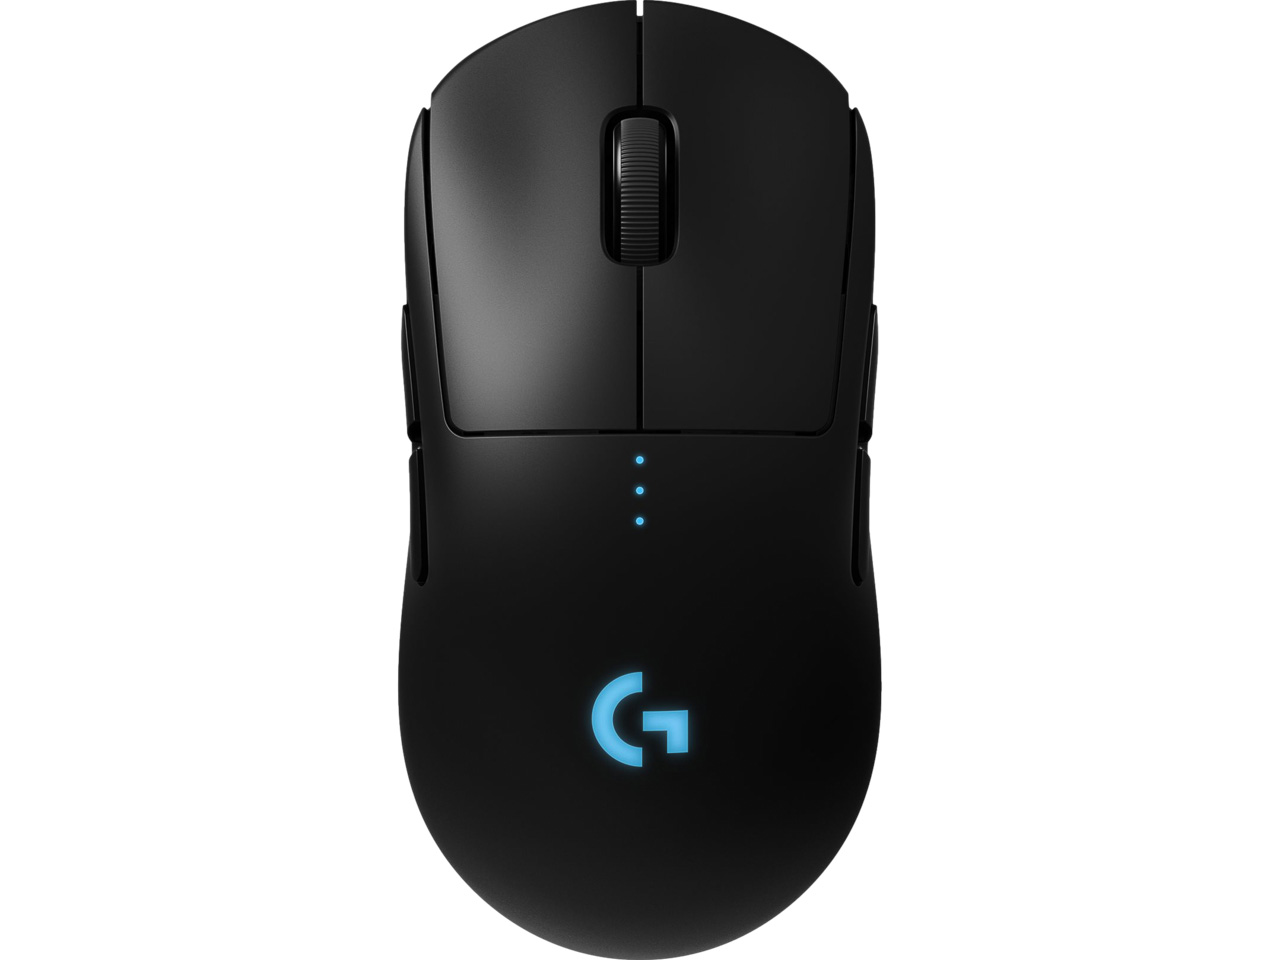 LOGITECH G PRO GAMING MOUSE BLACK 910-005272 both handed wireless USB 1